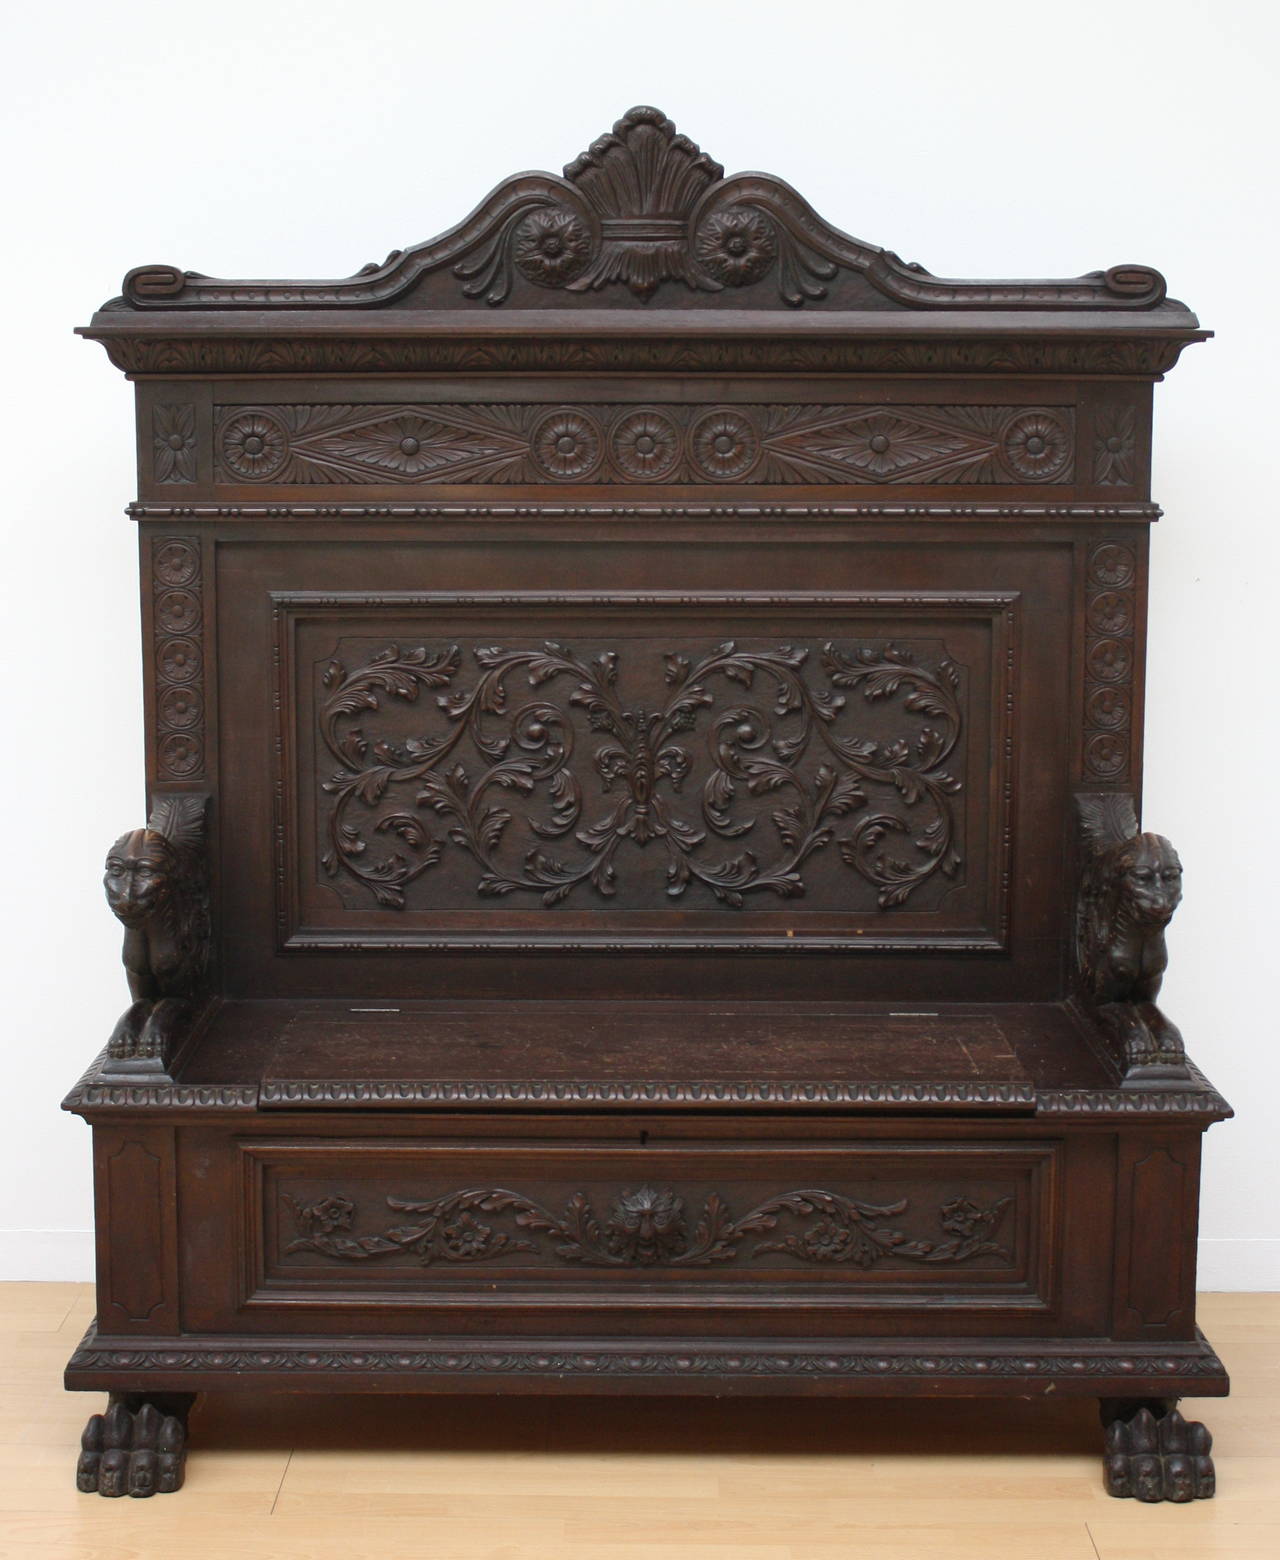 Well carved hall settle with carved Lion arm rests. In the front Lion-paw feet
Hinging seat for storage area.